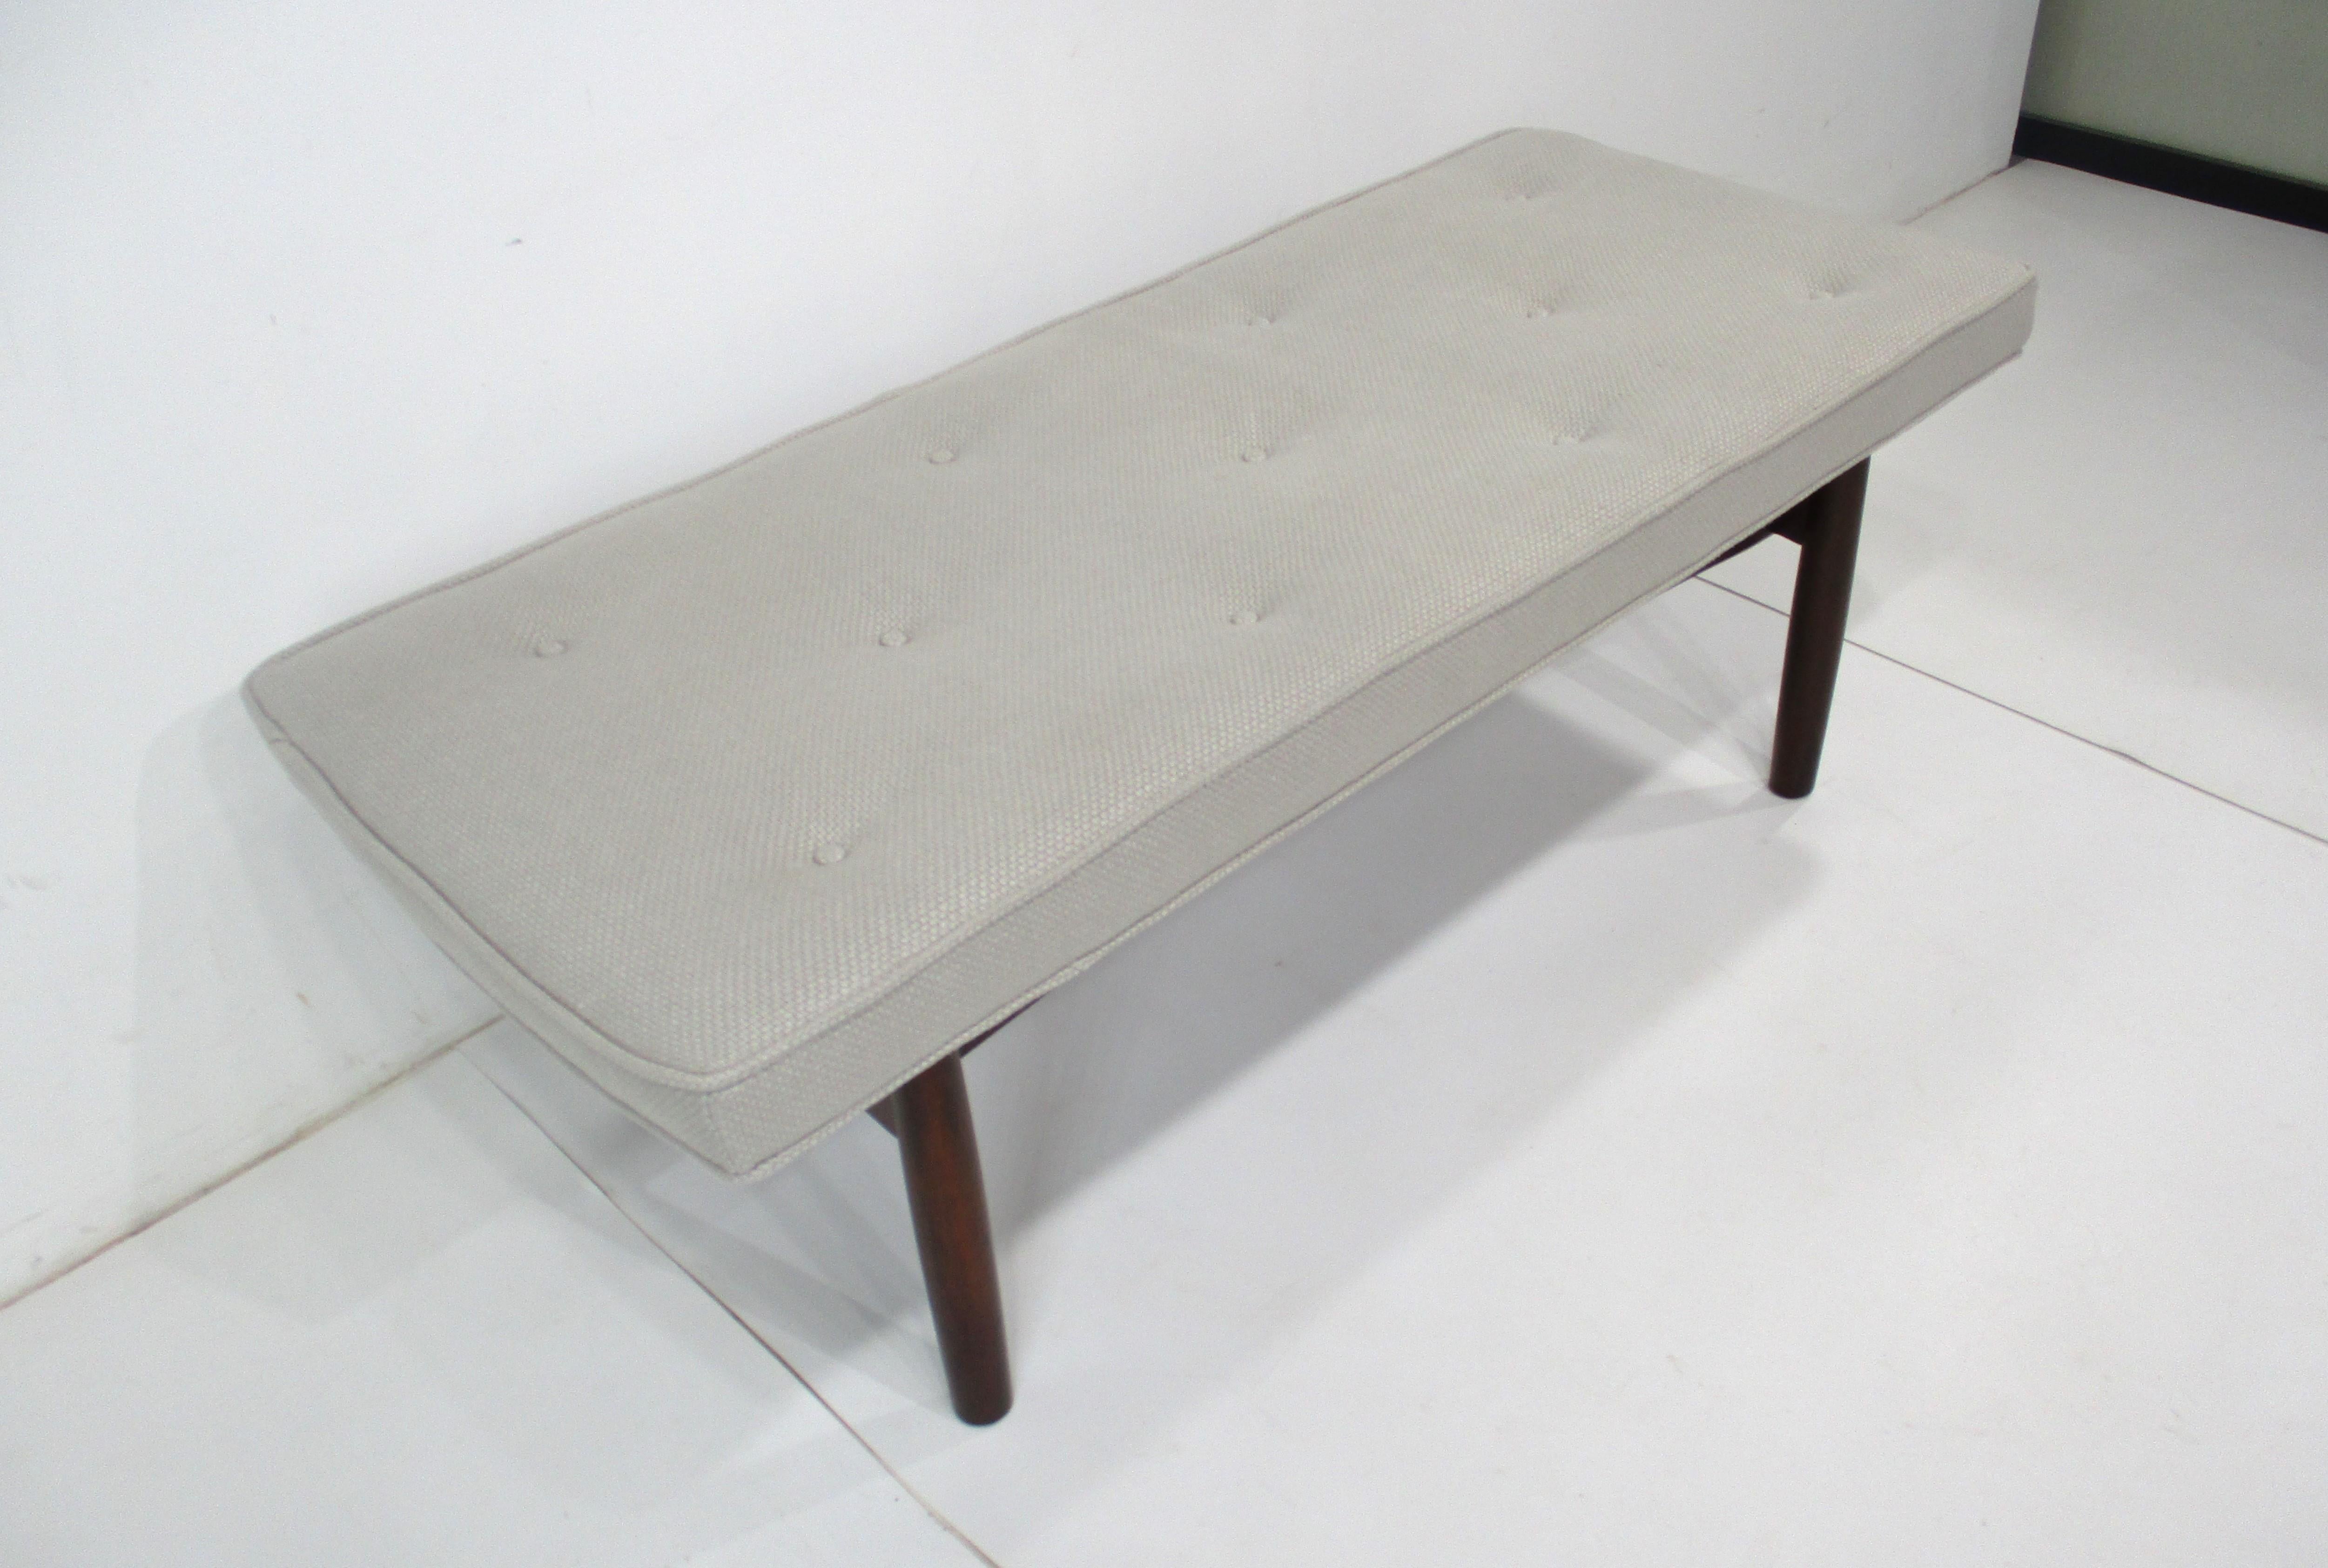 Upholstered Walnut Bench in the Style of Greta Grossman Danish Modern (B) In Good Condition For Sale In Cincinnati, OH